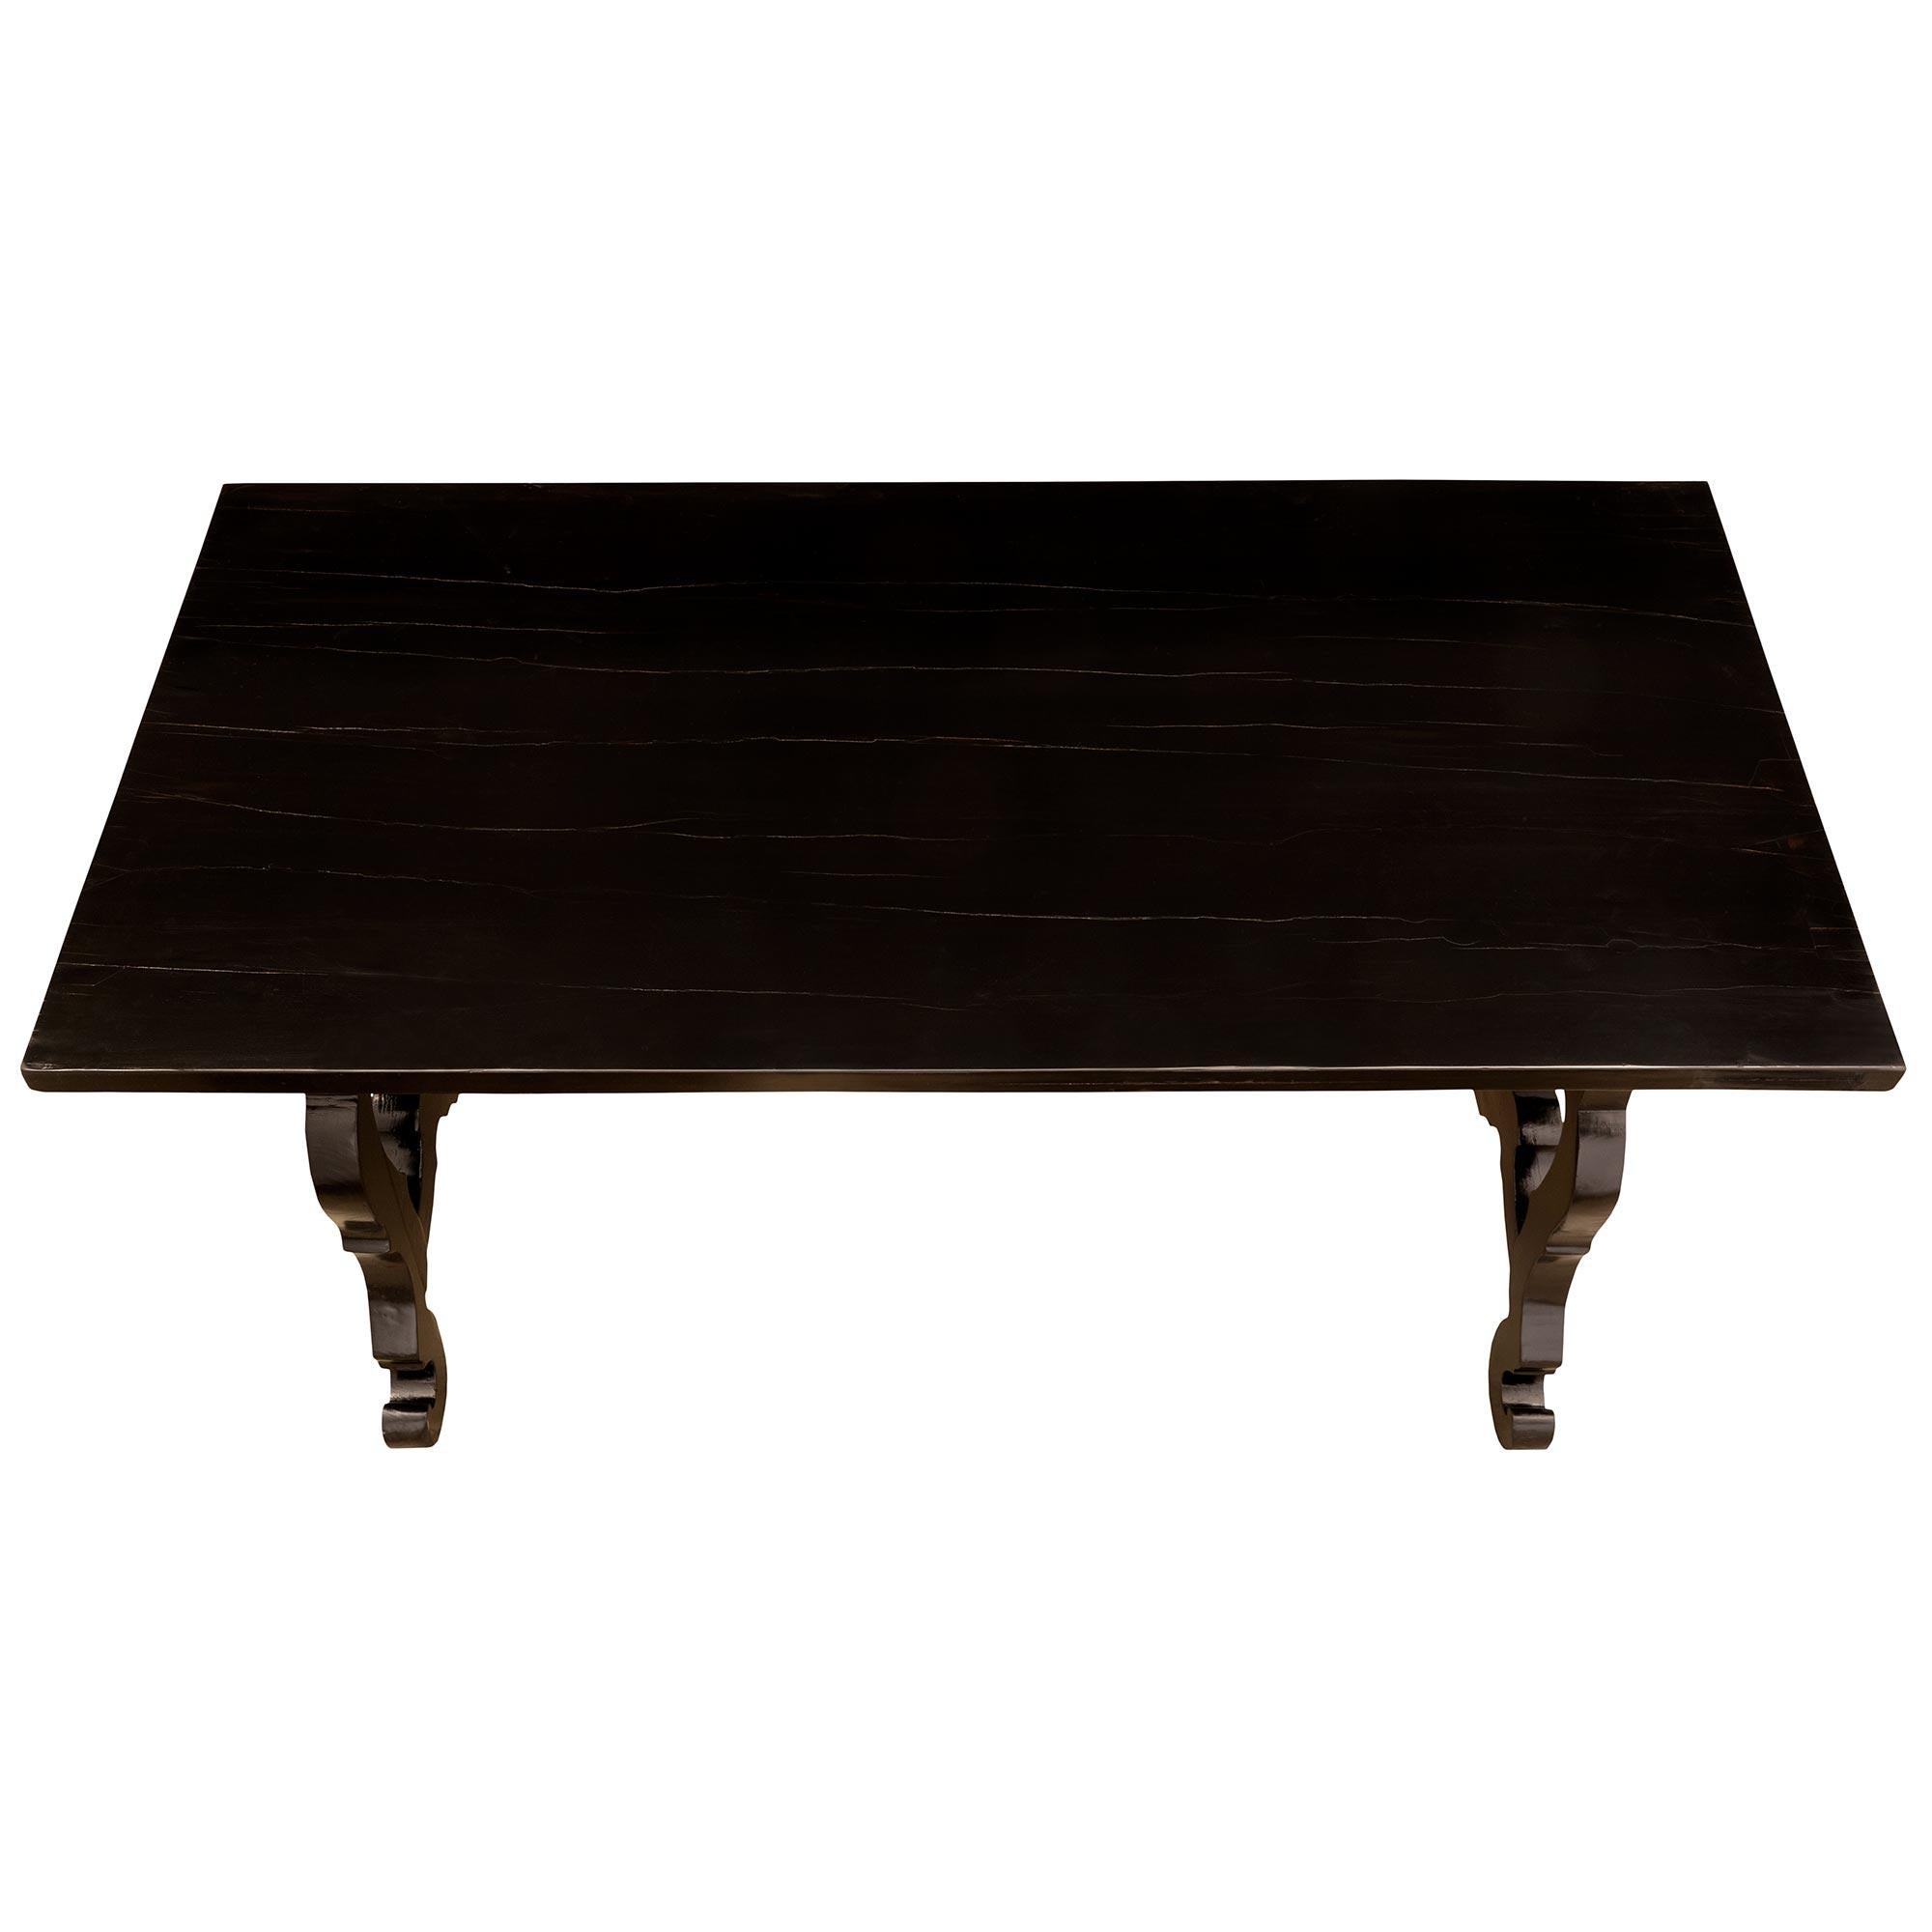 A handsome Italian 18th century ebonized fruitwood trestle table. The table is raised by two sets of scrolled pierced supports connected by the original hand-beaten wrought iron stretcher. Above is the elegant French polish ebonized fruitwood